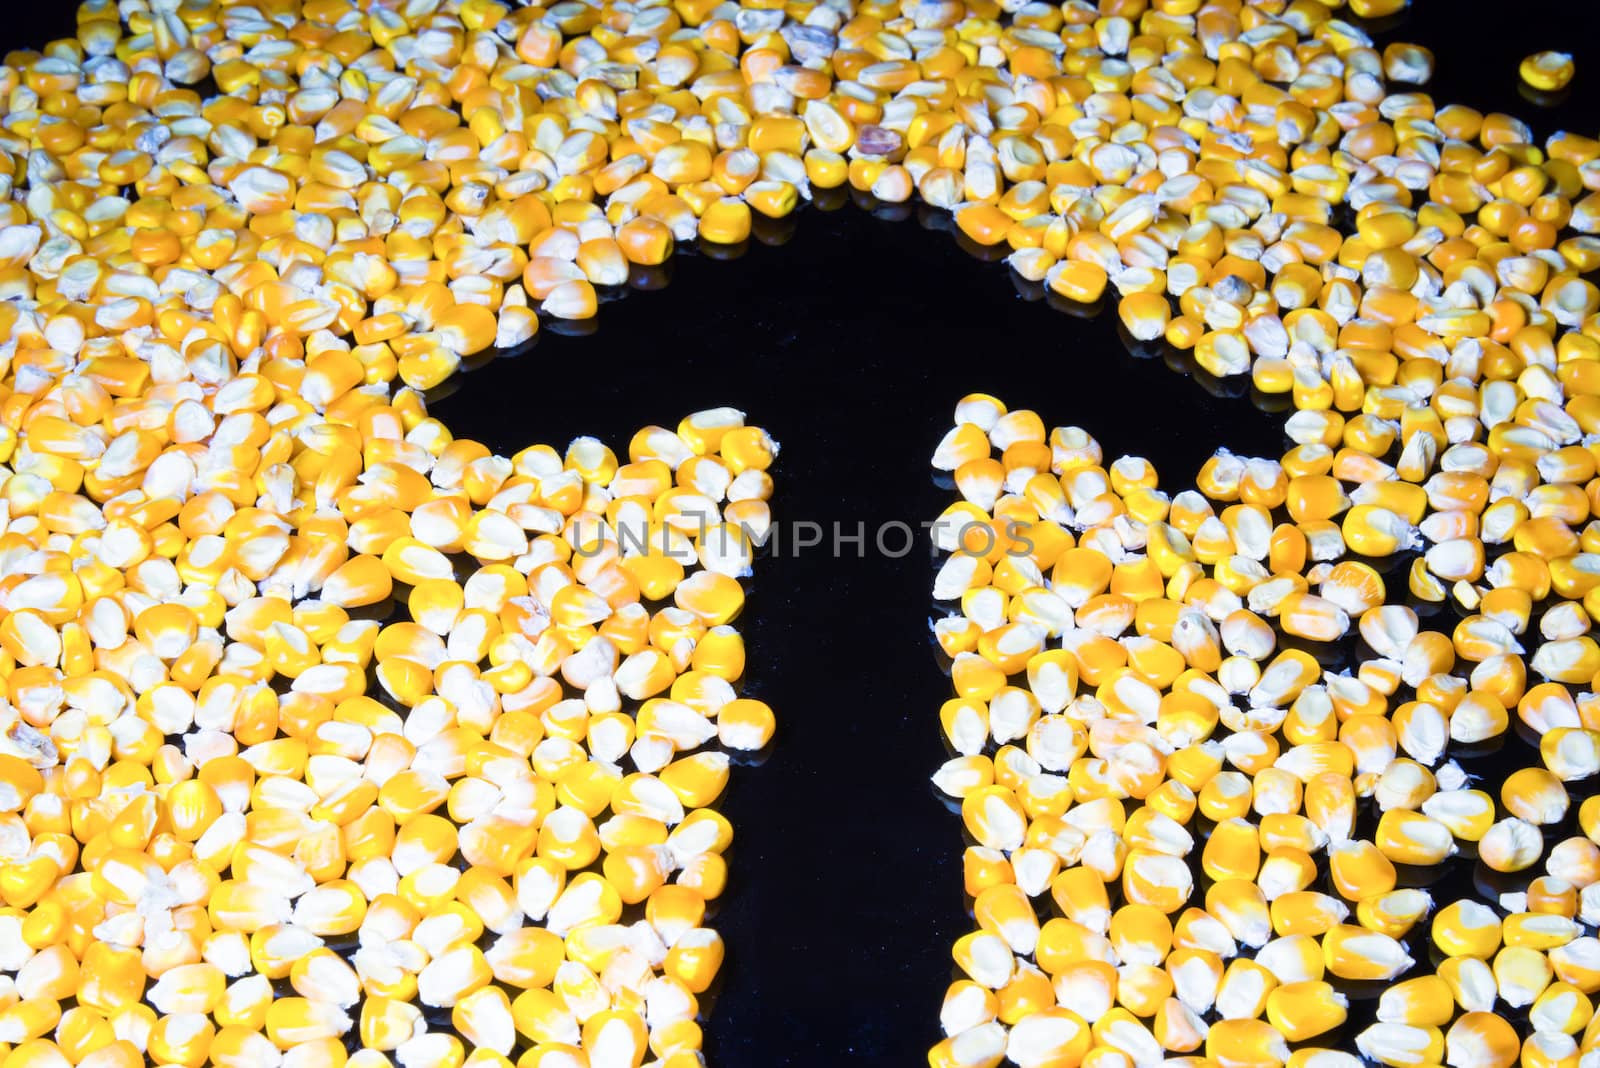 Seed corn to an arrow on a black background.